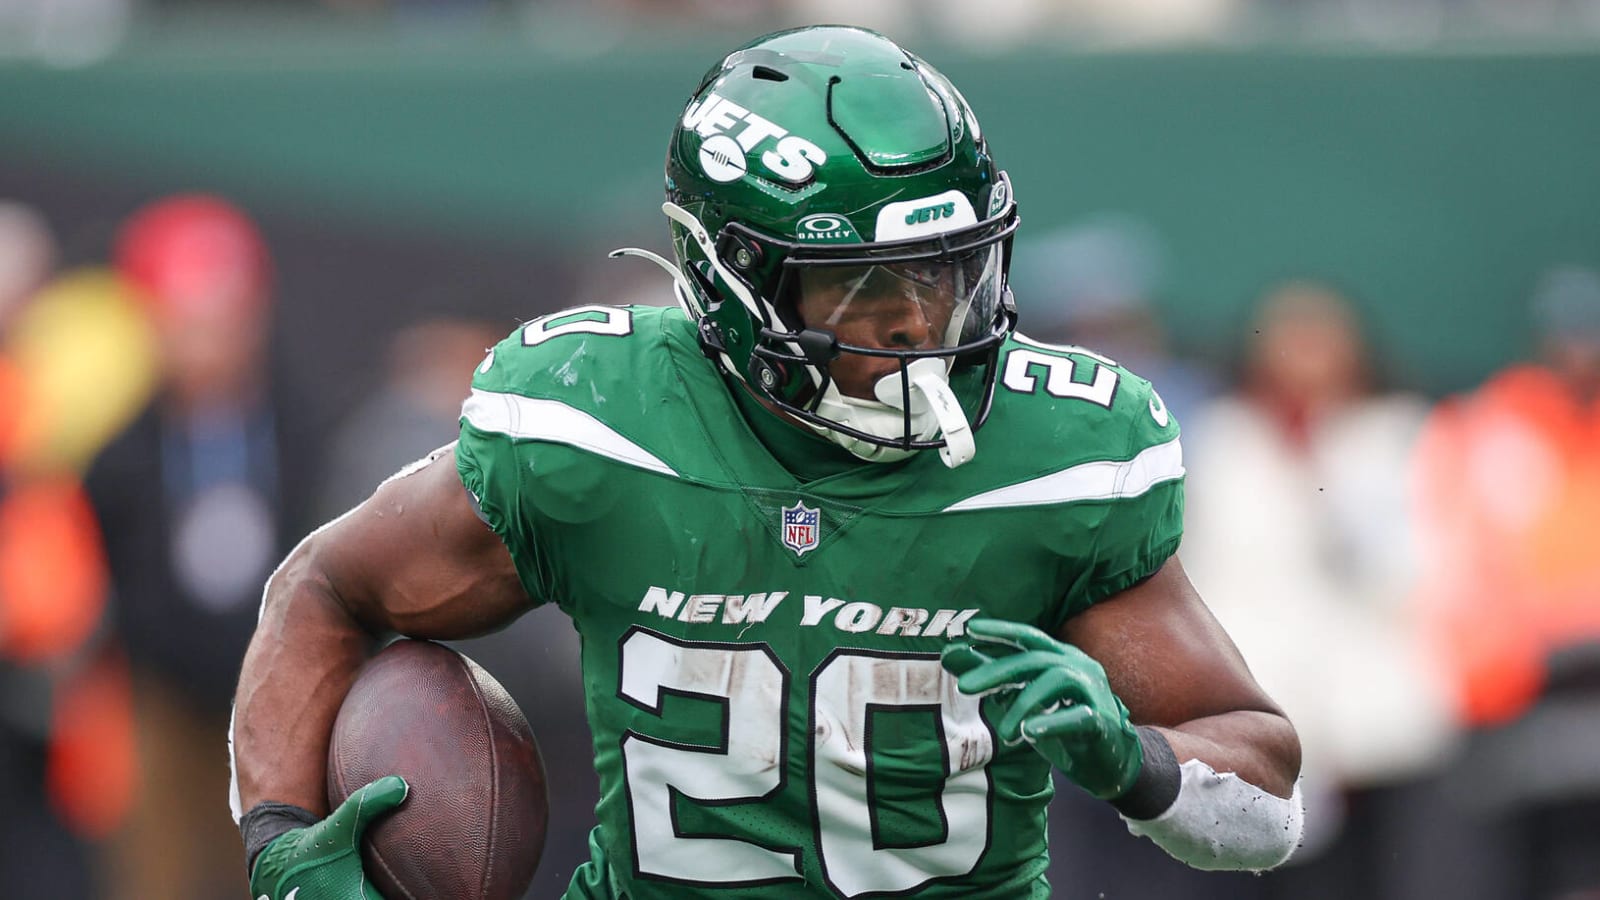 Jets RB shares classy message after being snubbed for NFL award